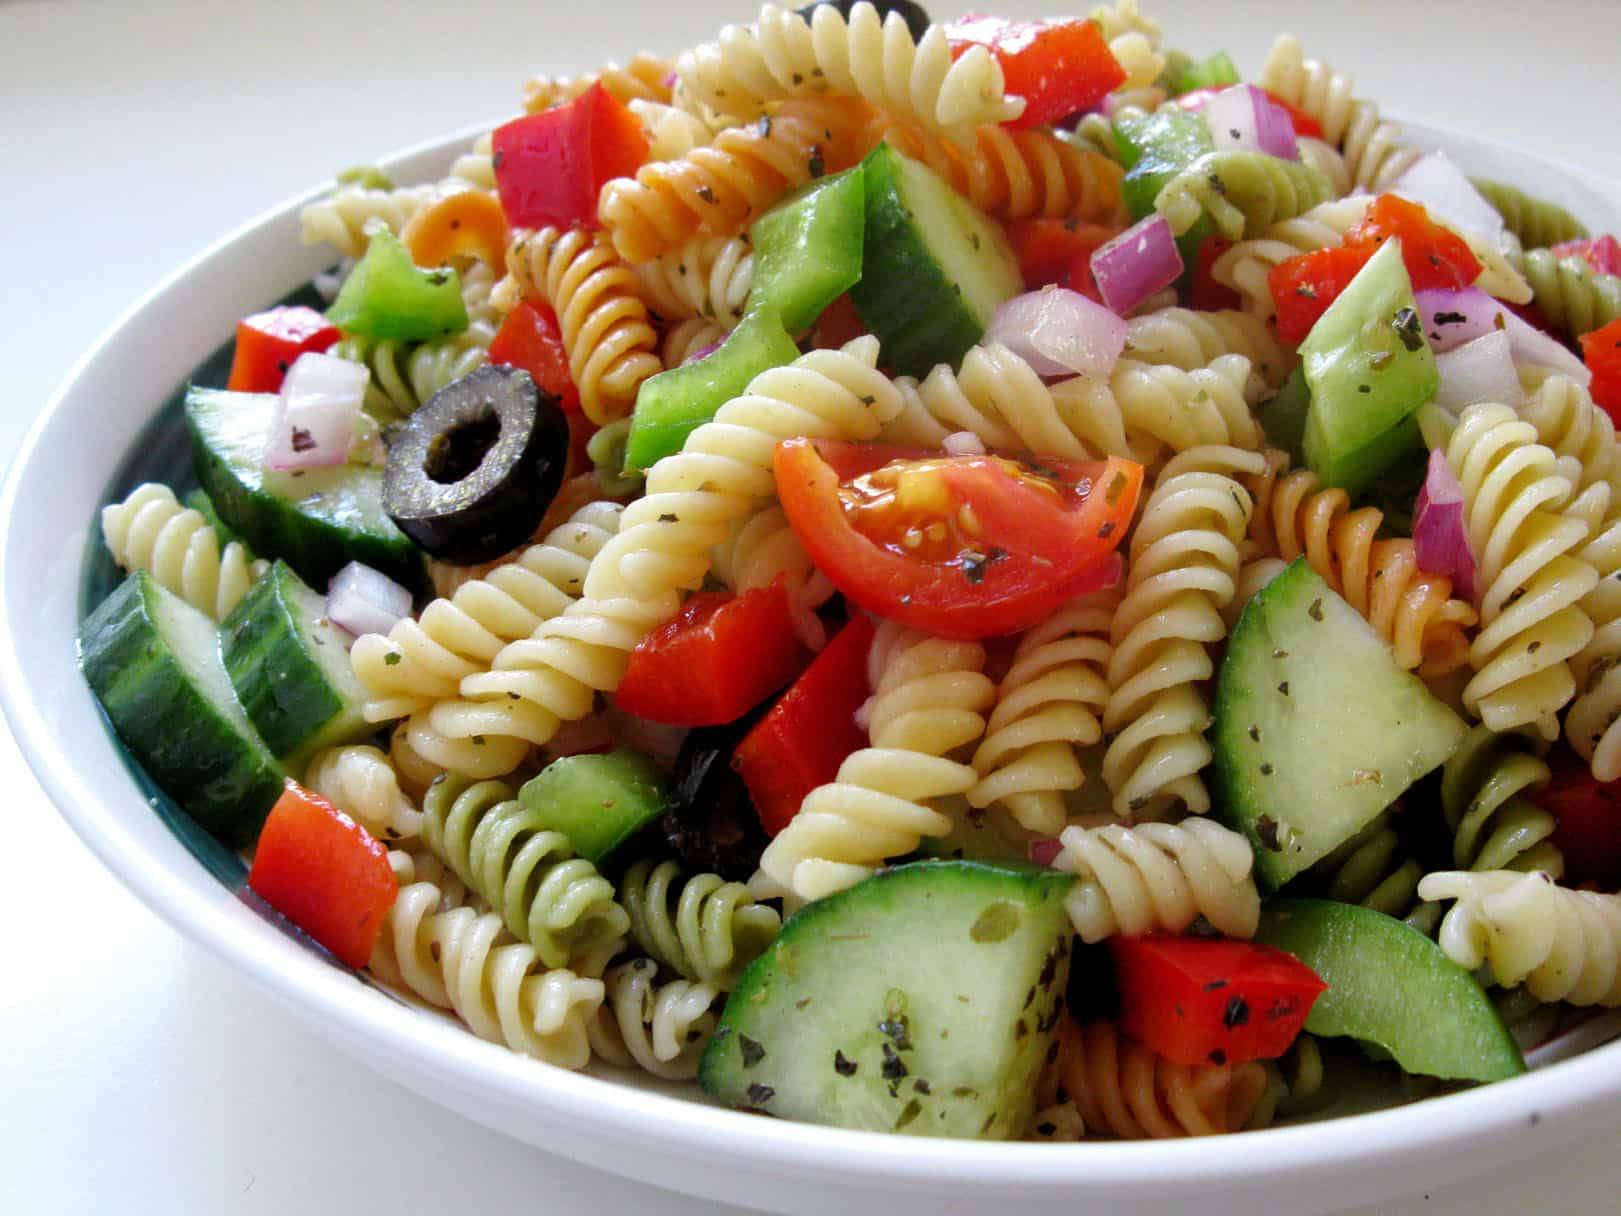 Try Out This Recipe For Tasty Summer Pasta Salad! 